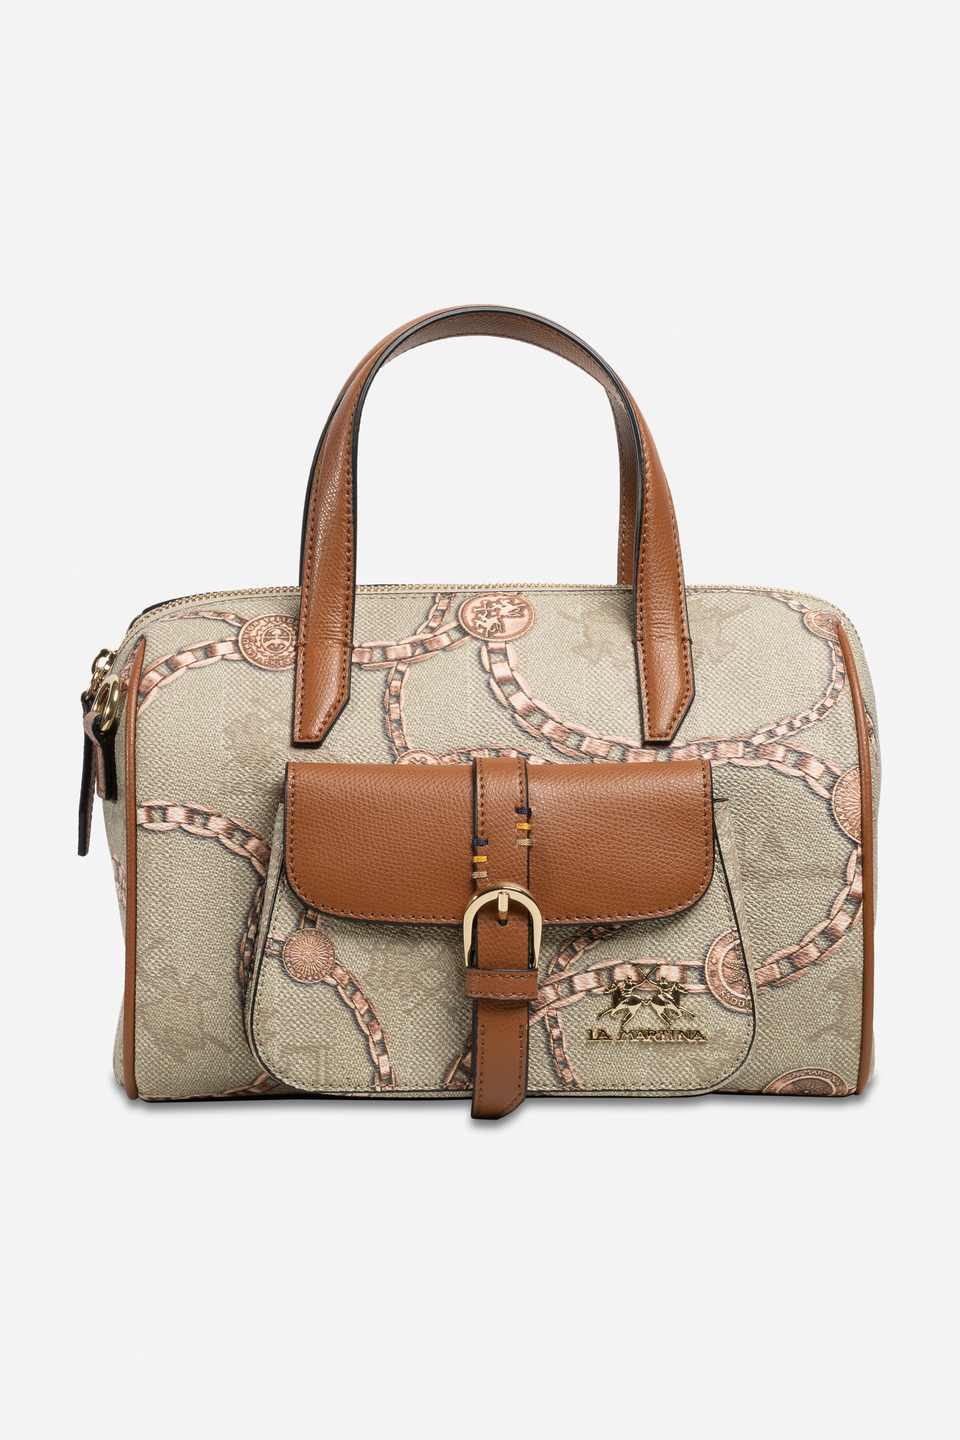 Women's bag in PU fabric and leather | La Martina - Official Online Shop